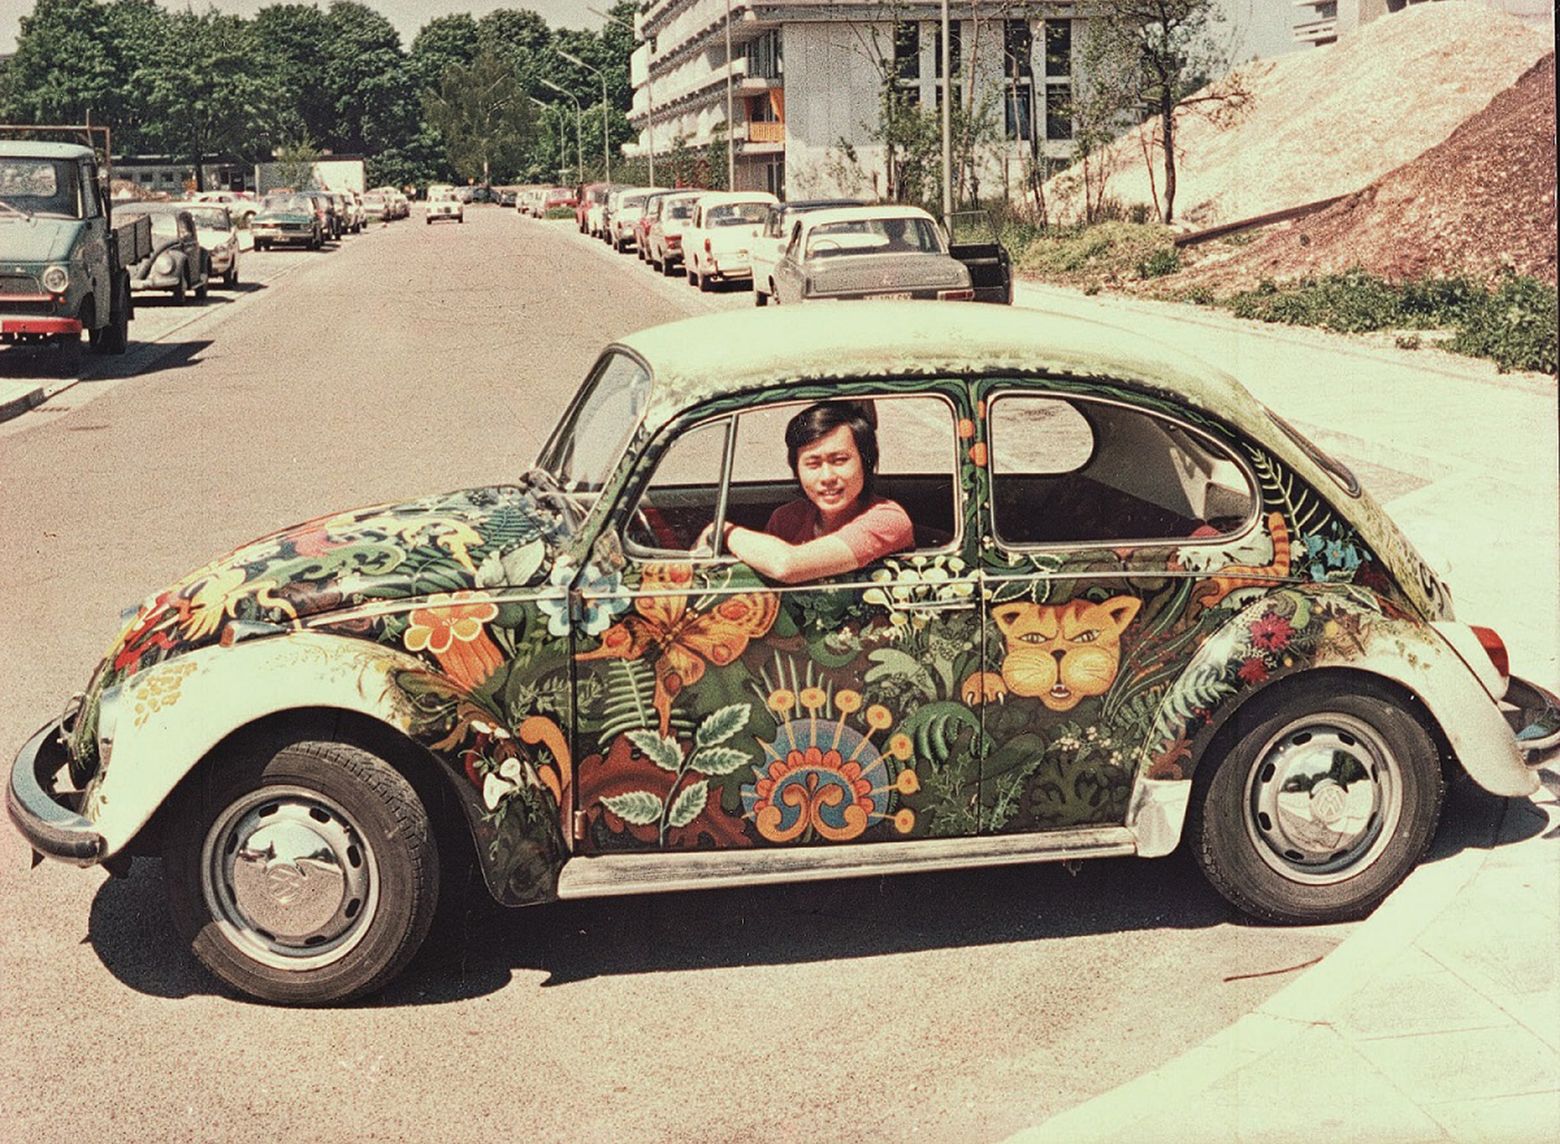 A Bug's life span: A look back at the famous Beetle, as VW discontinues  production | The Seattle Times